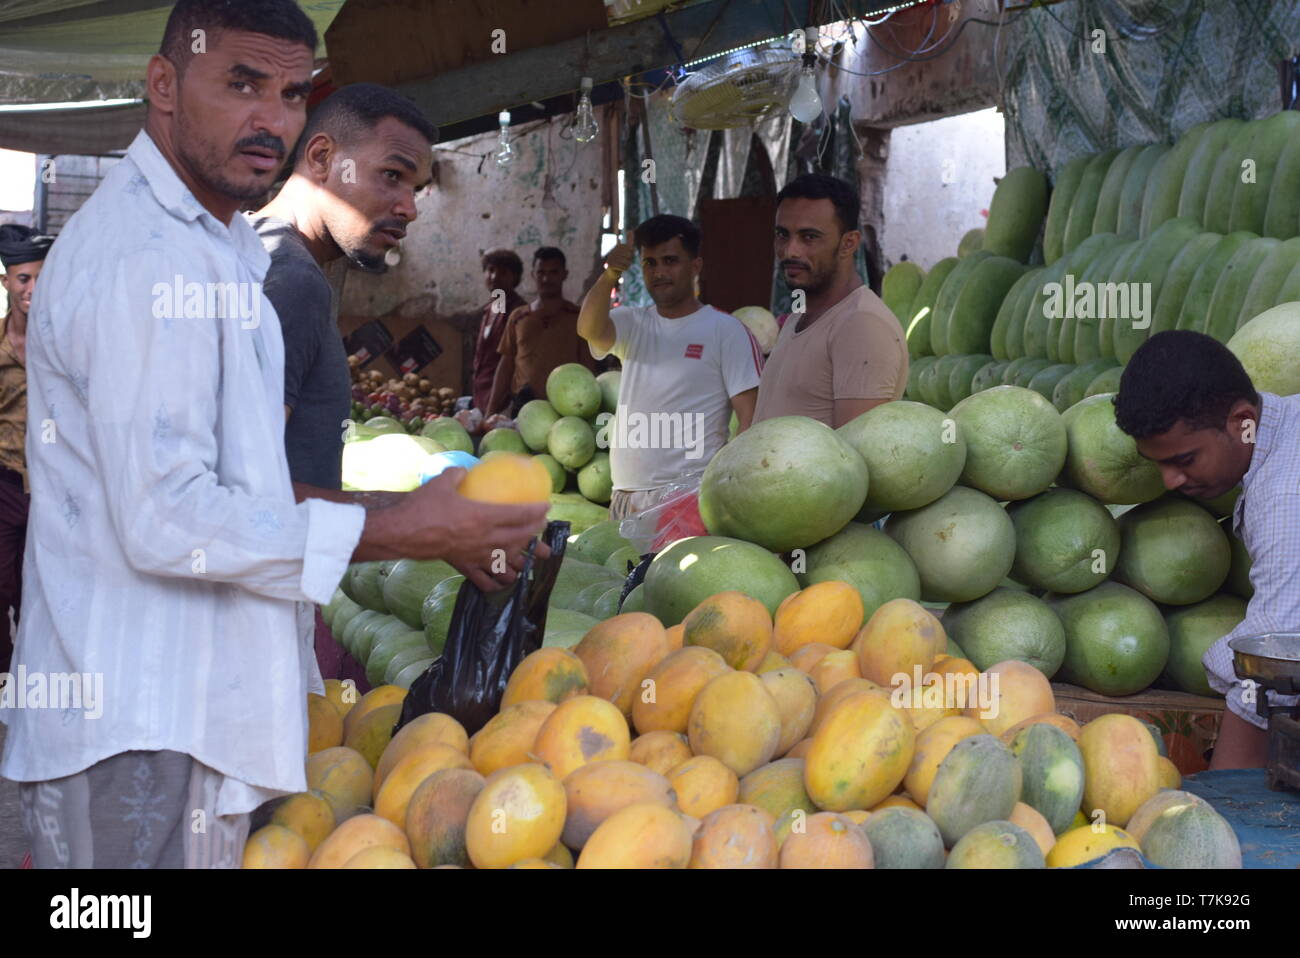 (190507) -- ADEN, May 7, 2019 (Xinhua) -- Yemeni customers shop at a market in the southern port city of Aden, Yemen, on May 7, 2019. People in the war-ridden Yemen complained about soaring prices of vegetables, fruits and other essentials as Ramadan began, a holy month during which Muslims worldwide abstain from eating and drinking from dawn to dusk. (Xinhua/Murad Abdo) Stock Photo